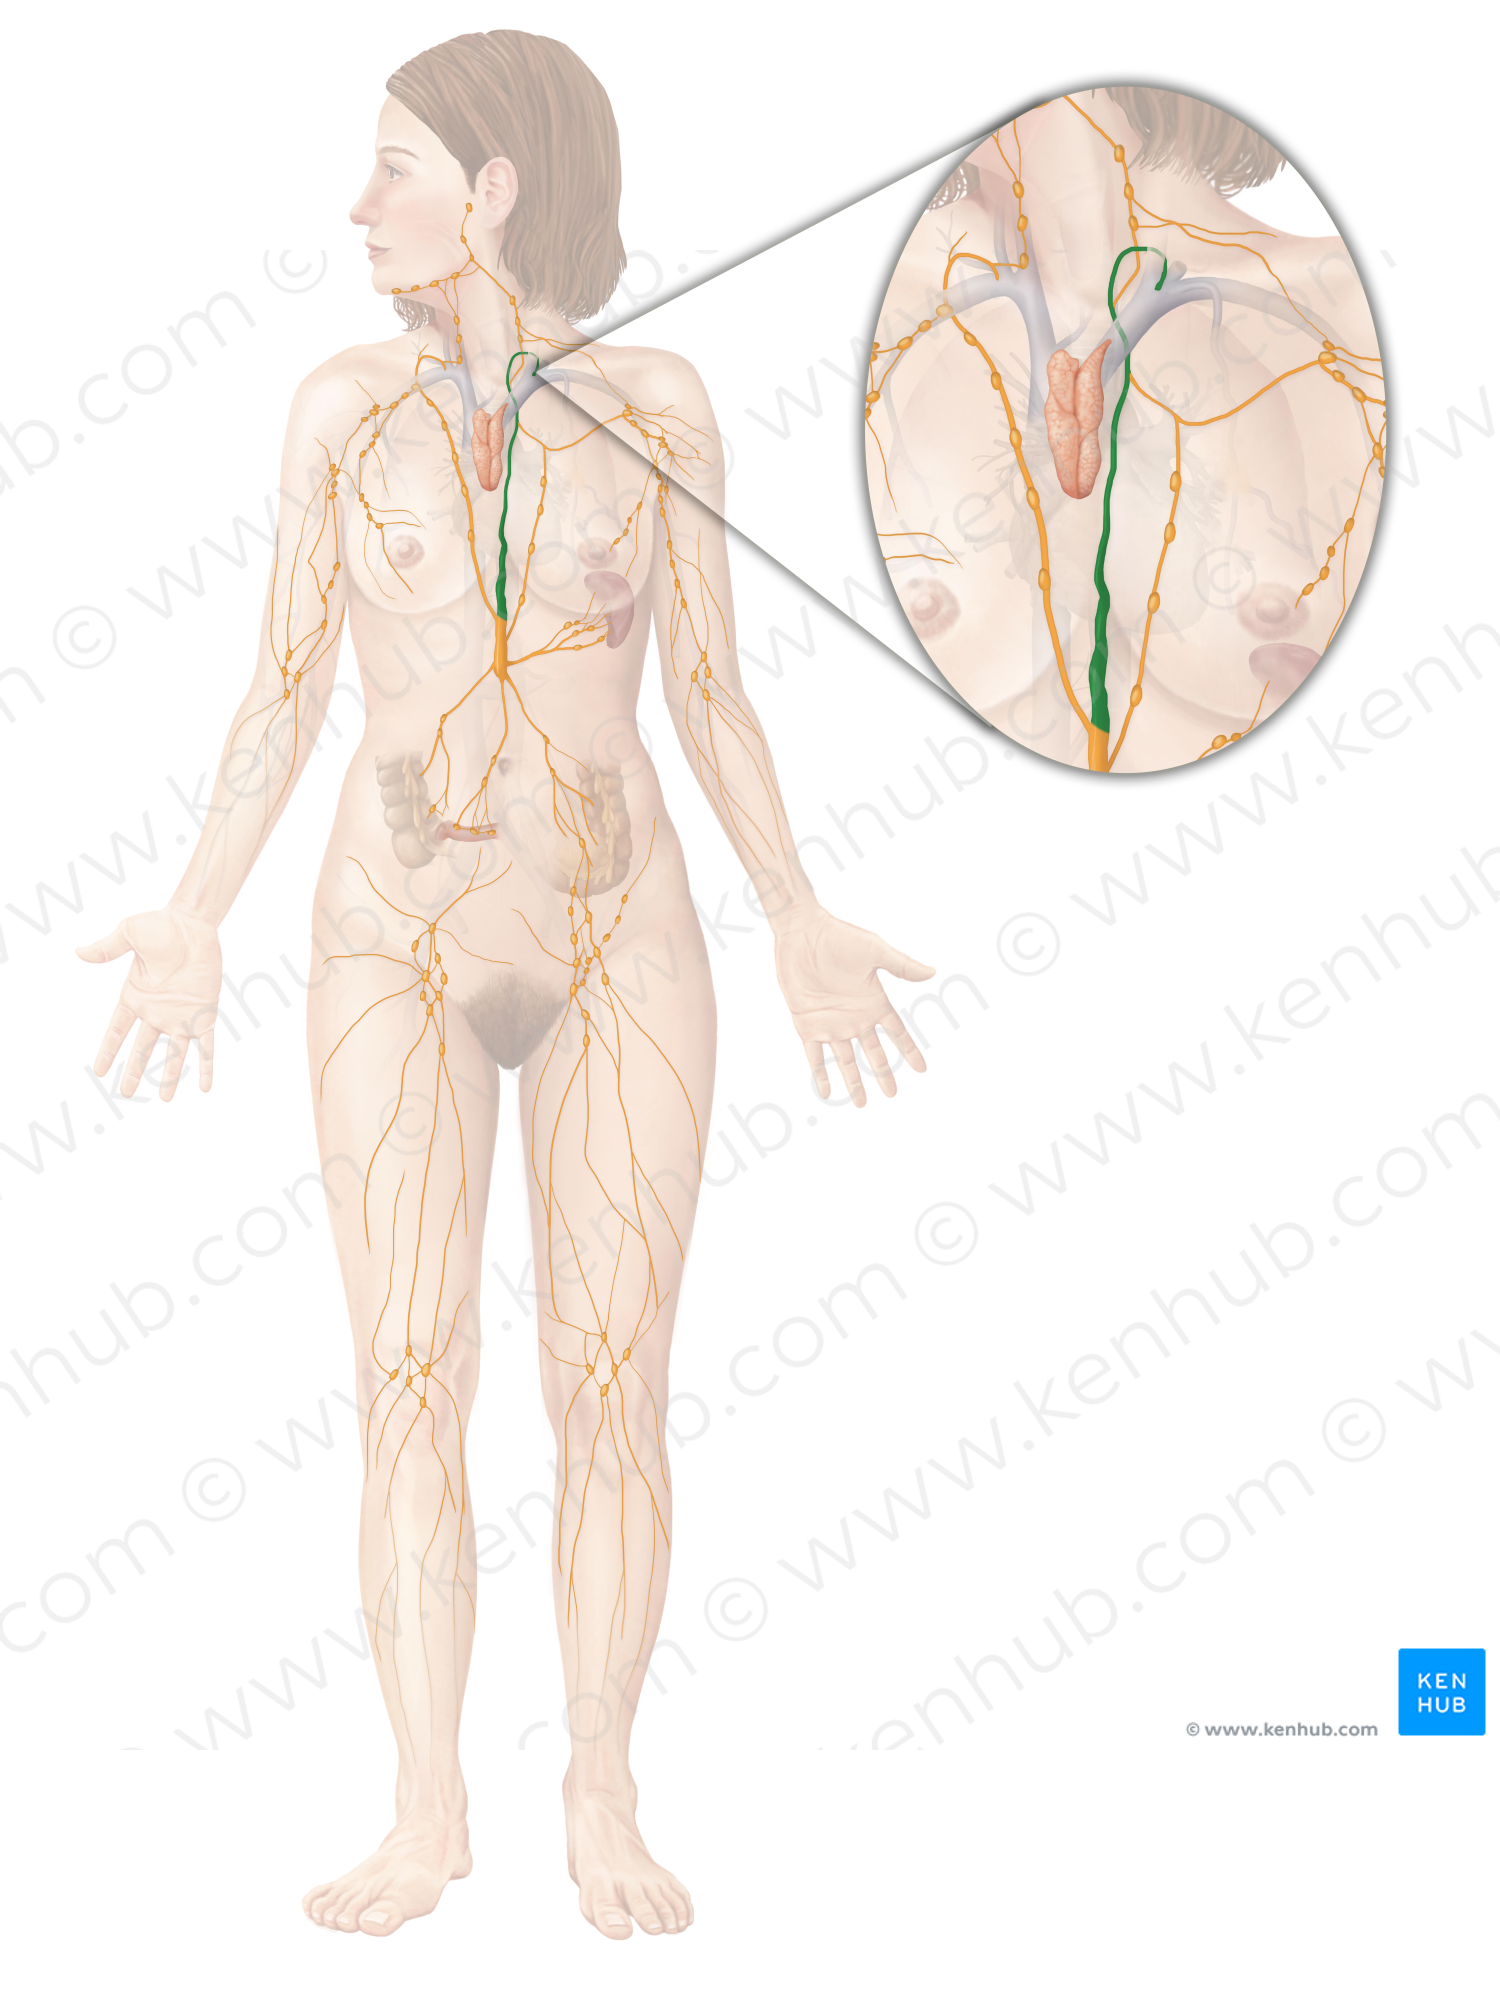 Thoracic duct (#3360)